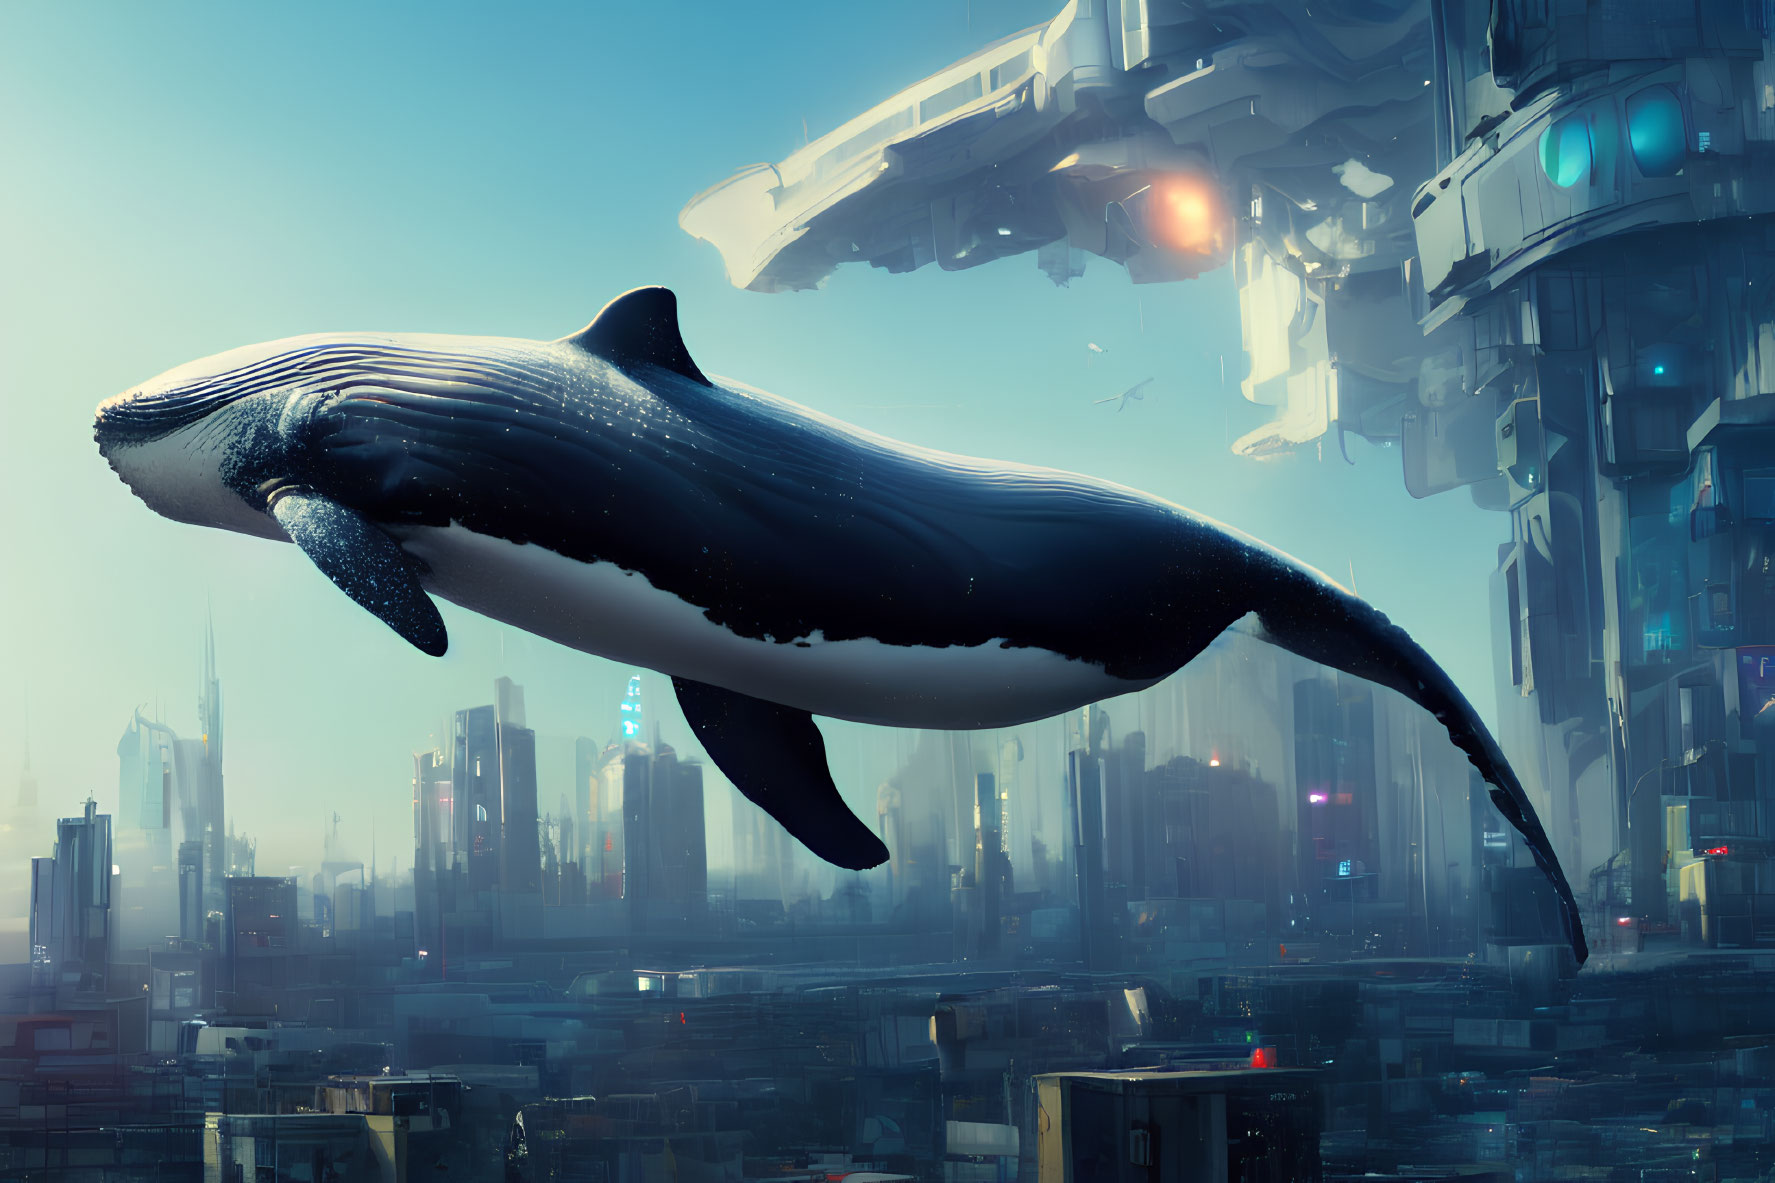 Gigantic whale above futuristic cityscape with tall buildings and flying vehicles